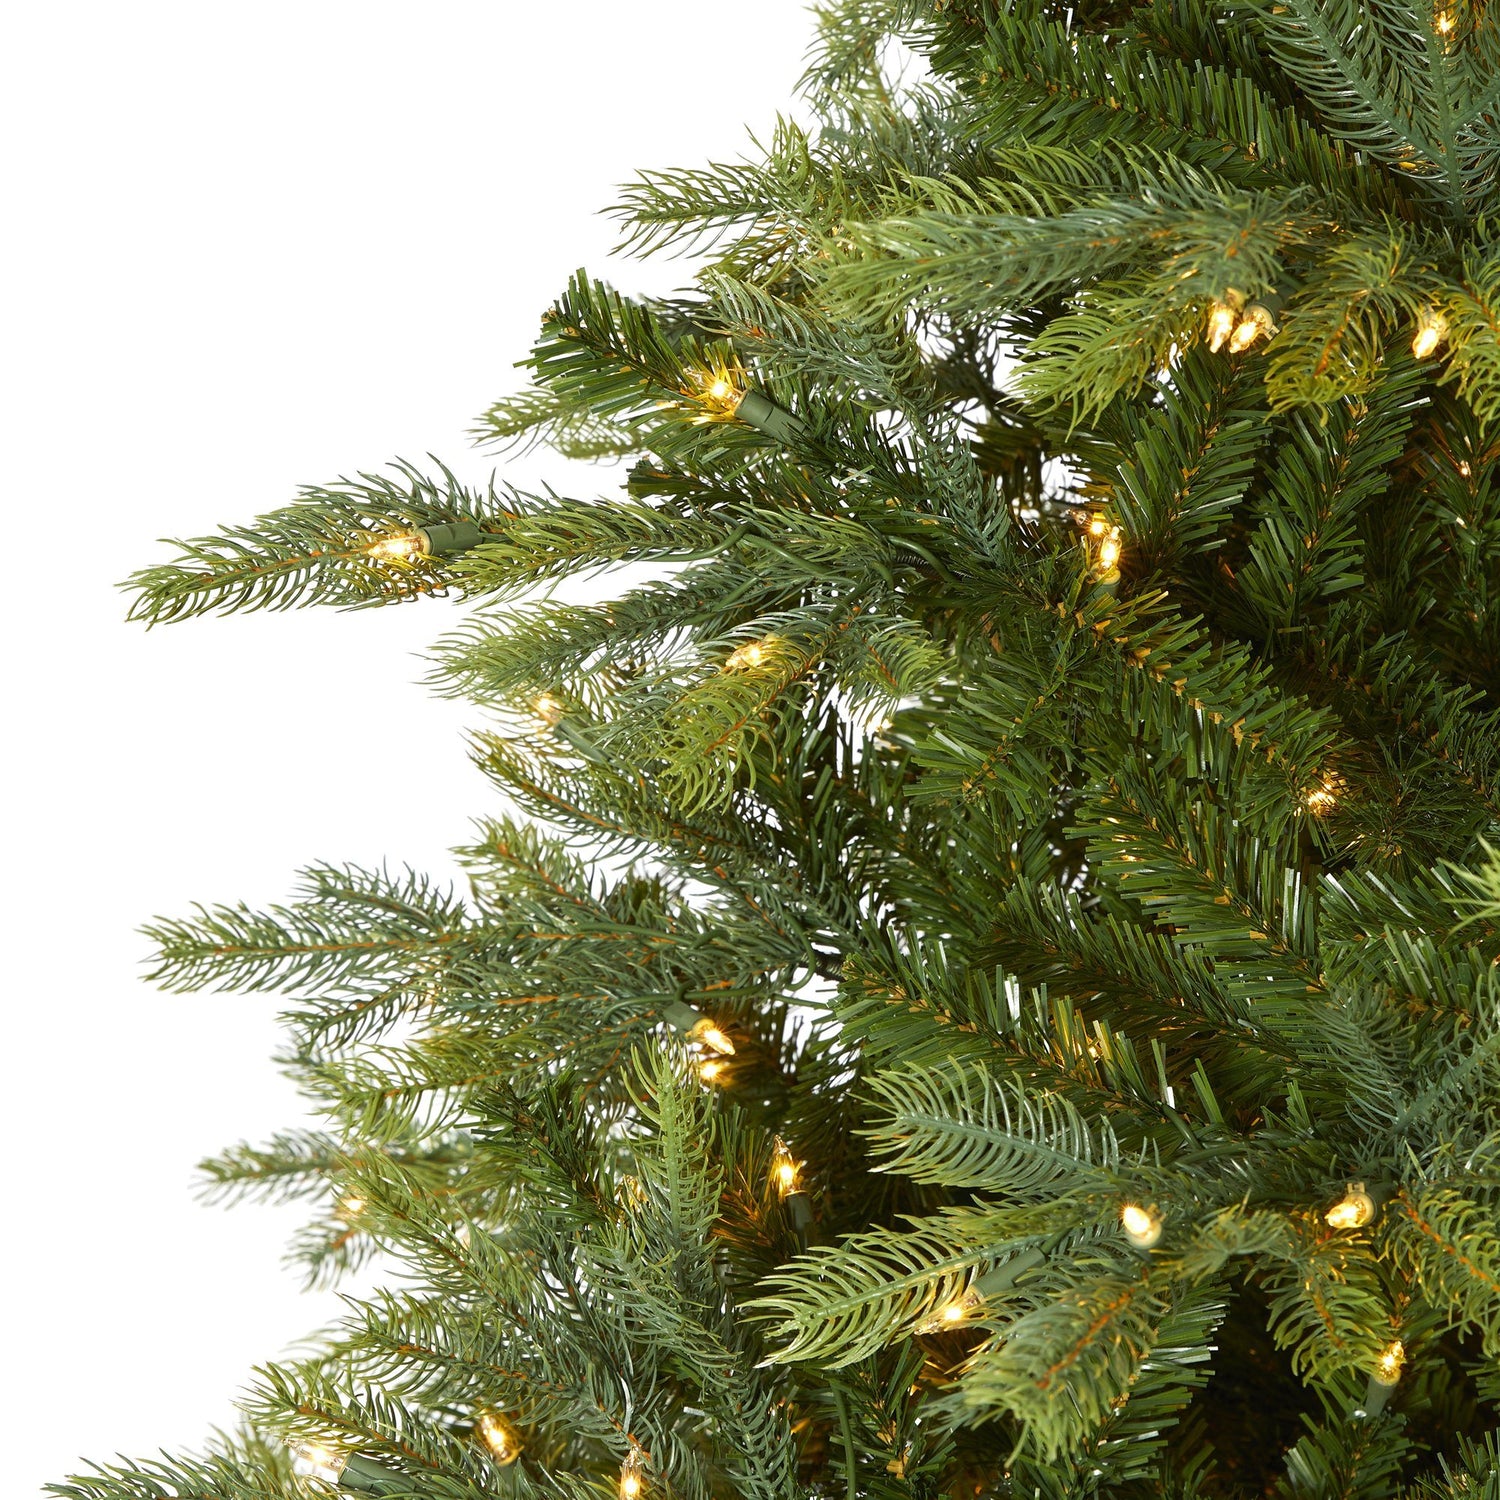 8’ North Carolina Spruce Artificial Christmas Tree with 650 Clear Lights and 1303 Bendable Branches